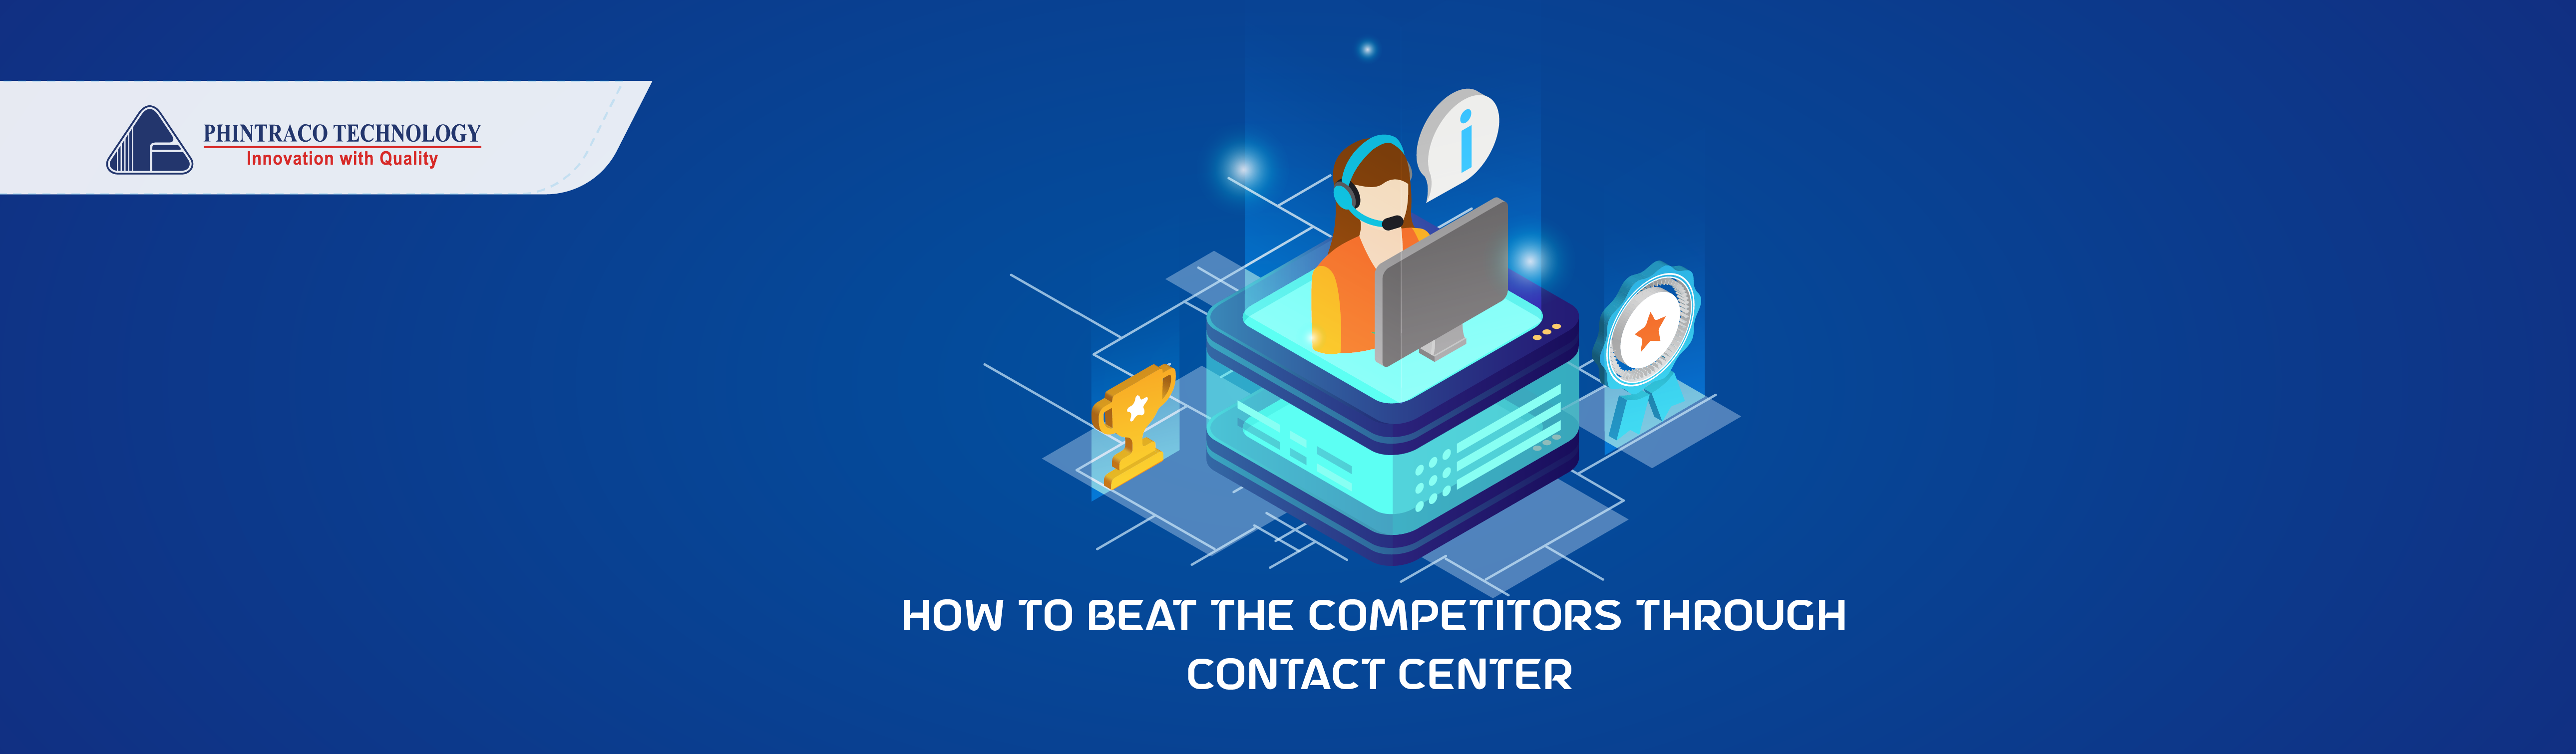 How To Beat the Competitors Through Contact Center